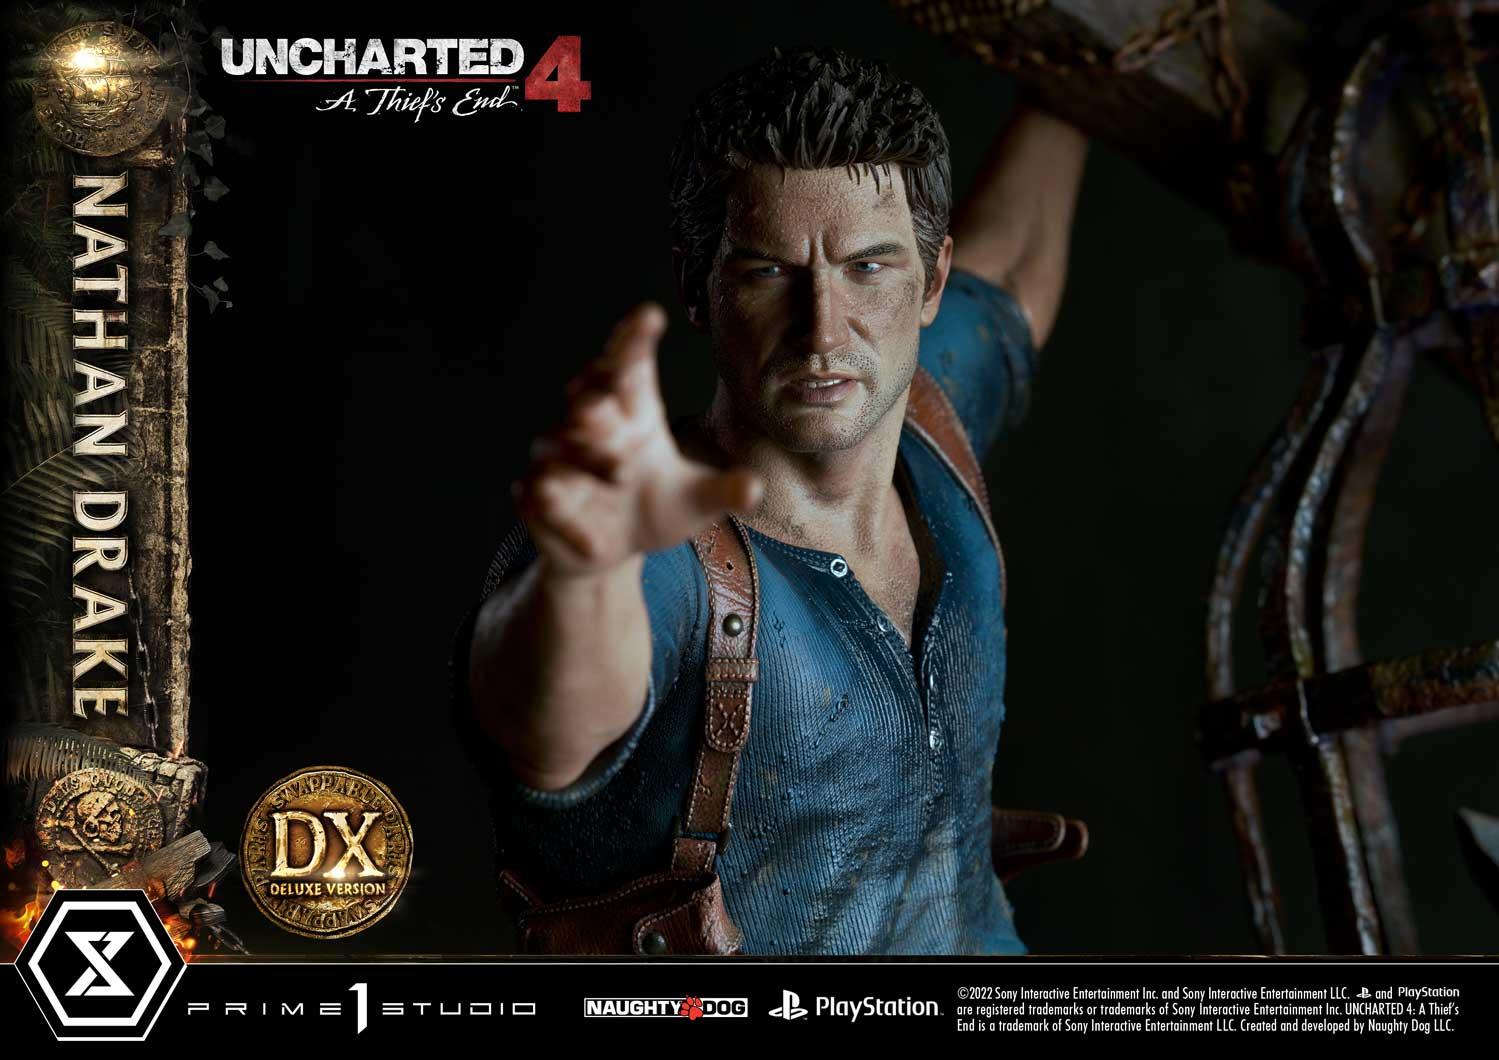 1/4 ULTIMATE PREMIUM MASTERLINE UNCHARTED 4: A THIEF'S END NATHAN DRAKE DX  VERSION